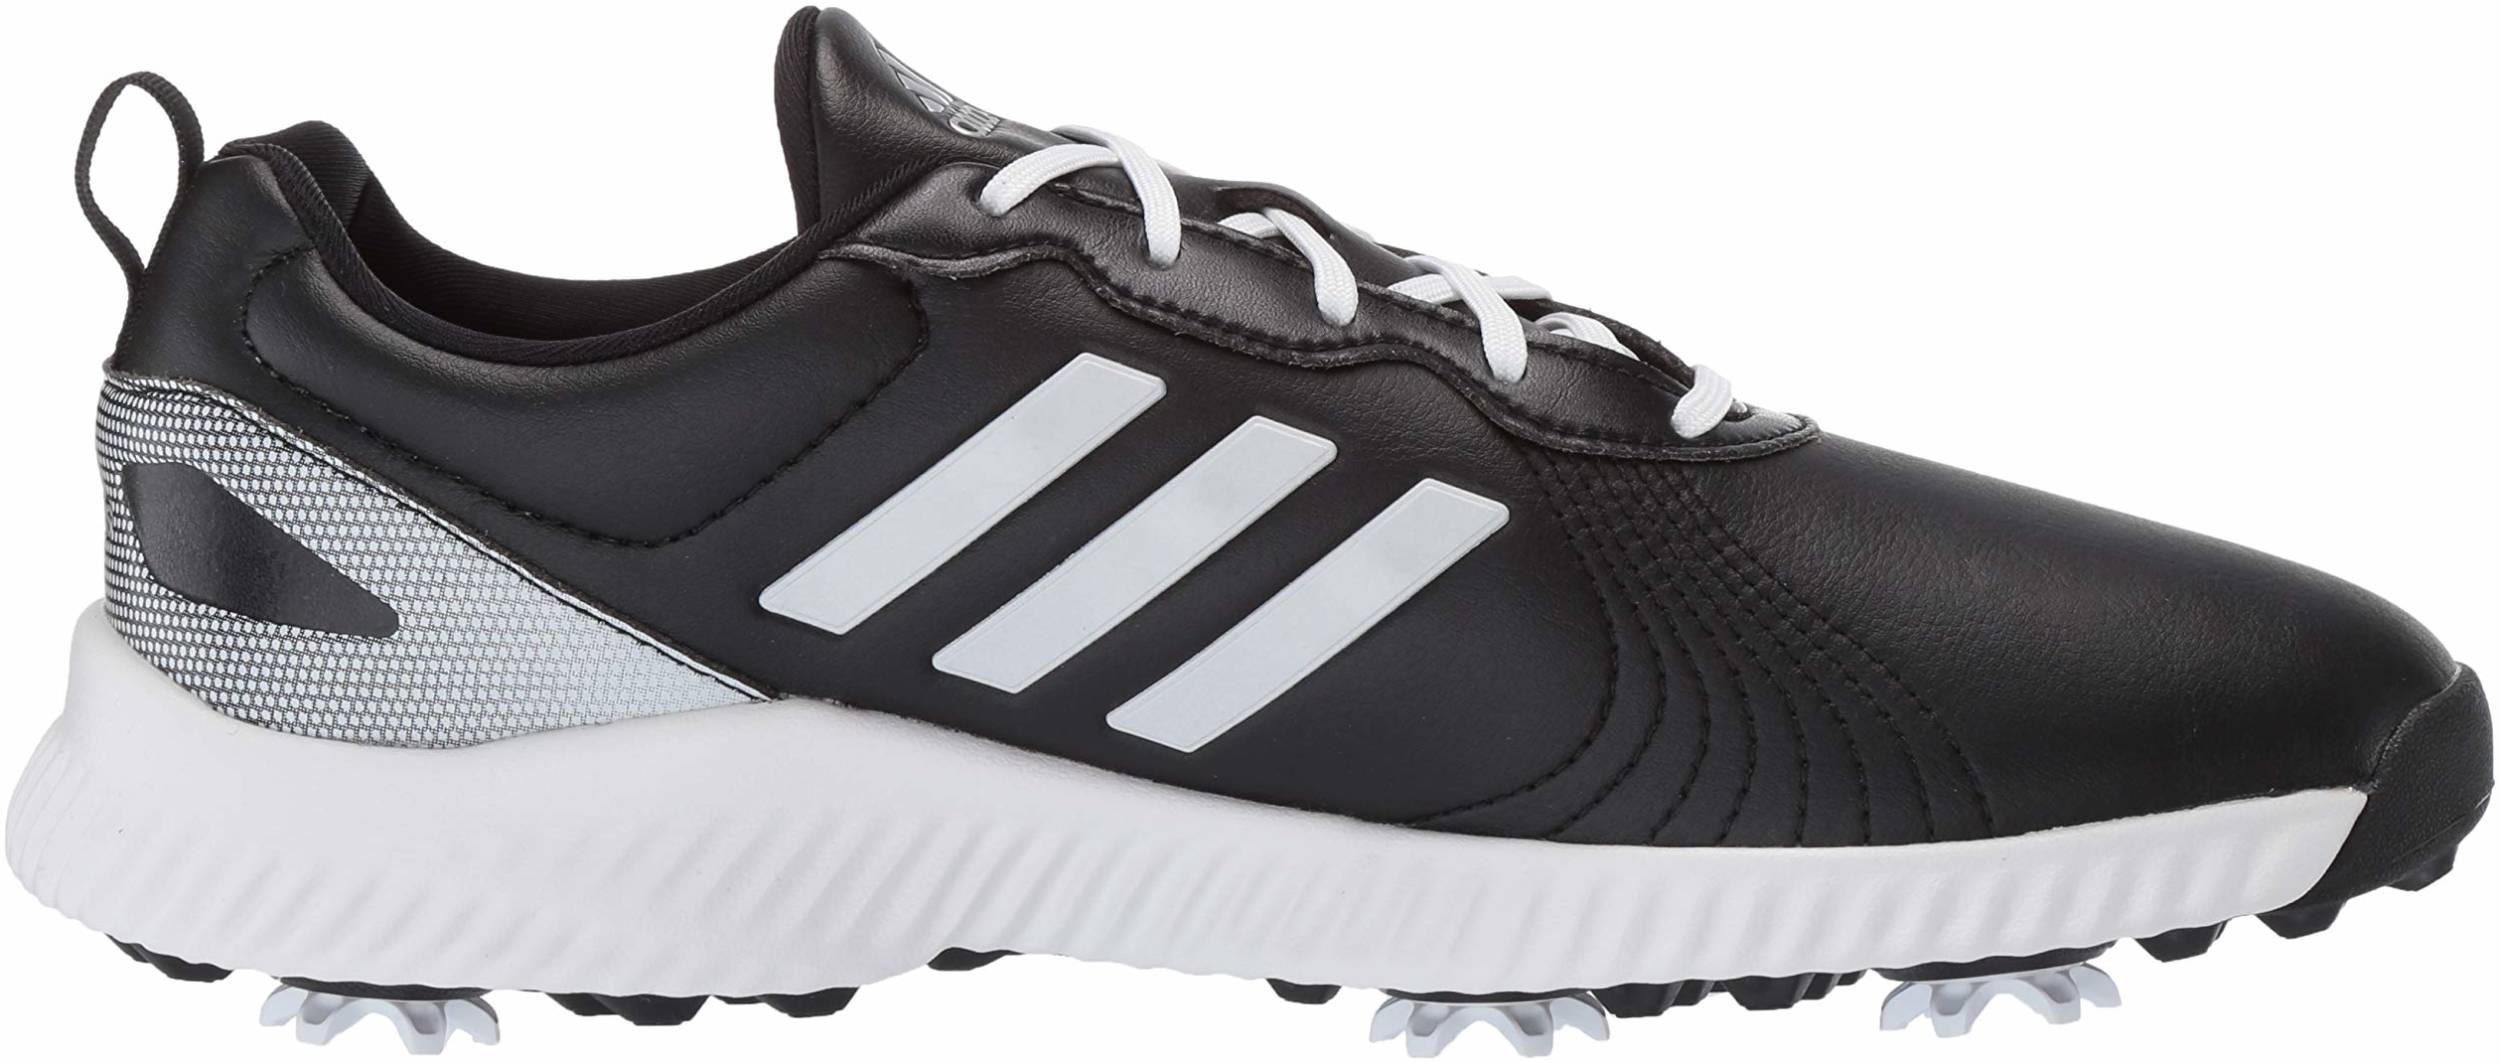 adidas response bounce golf shoes